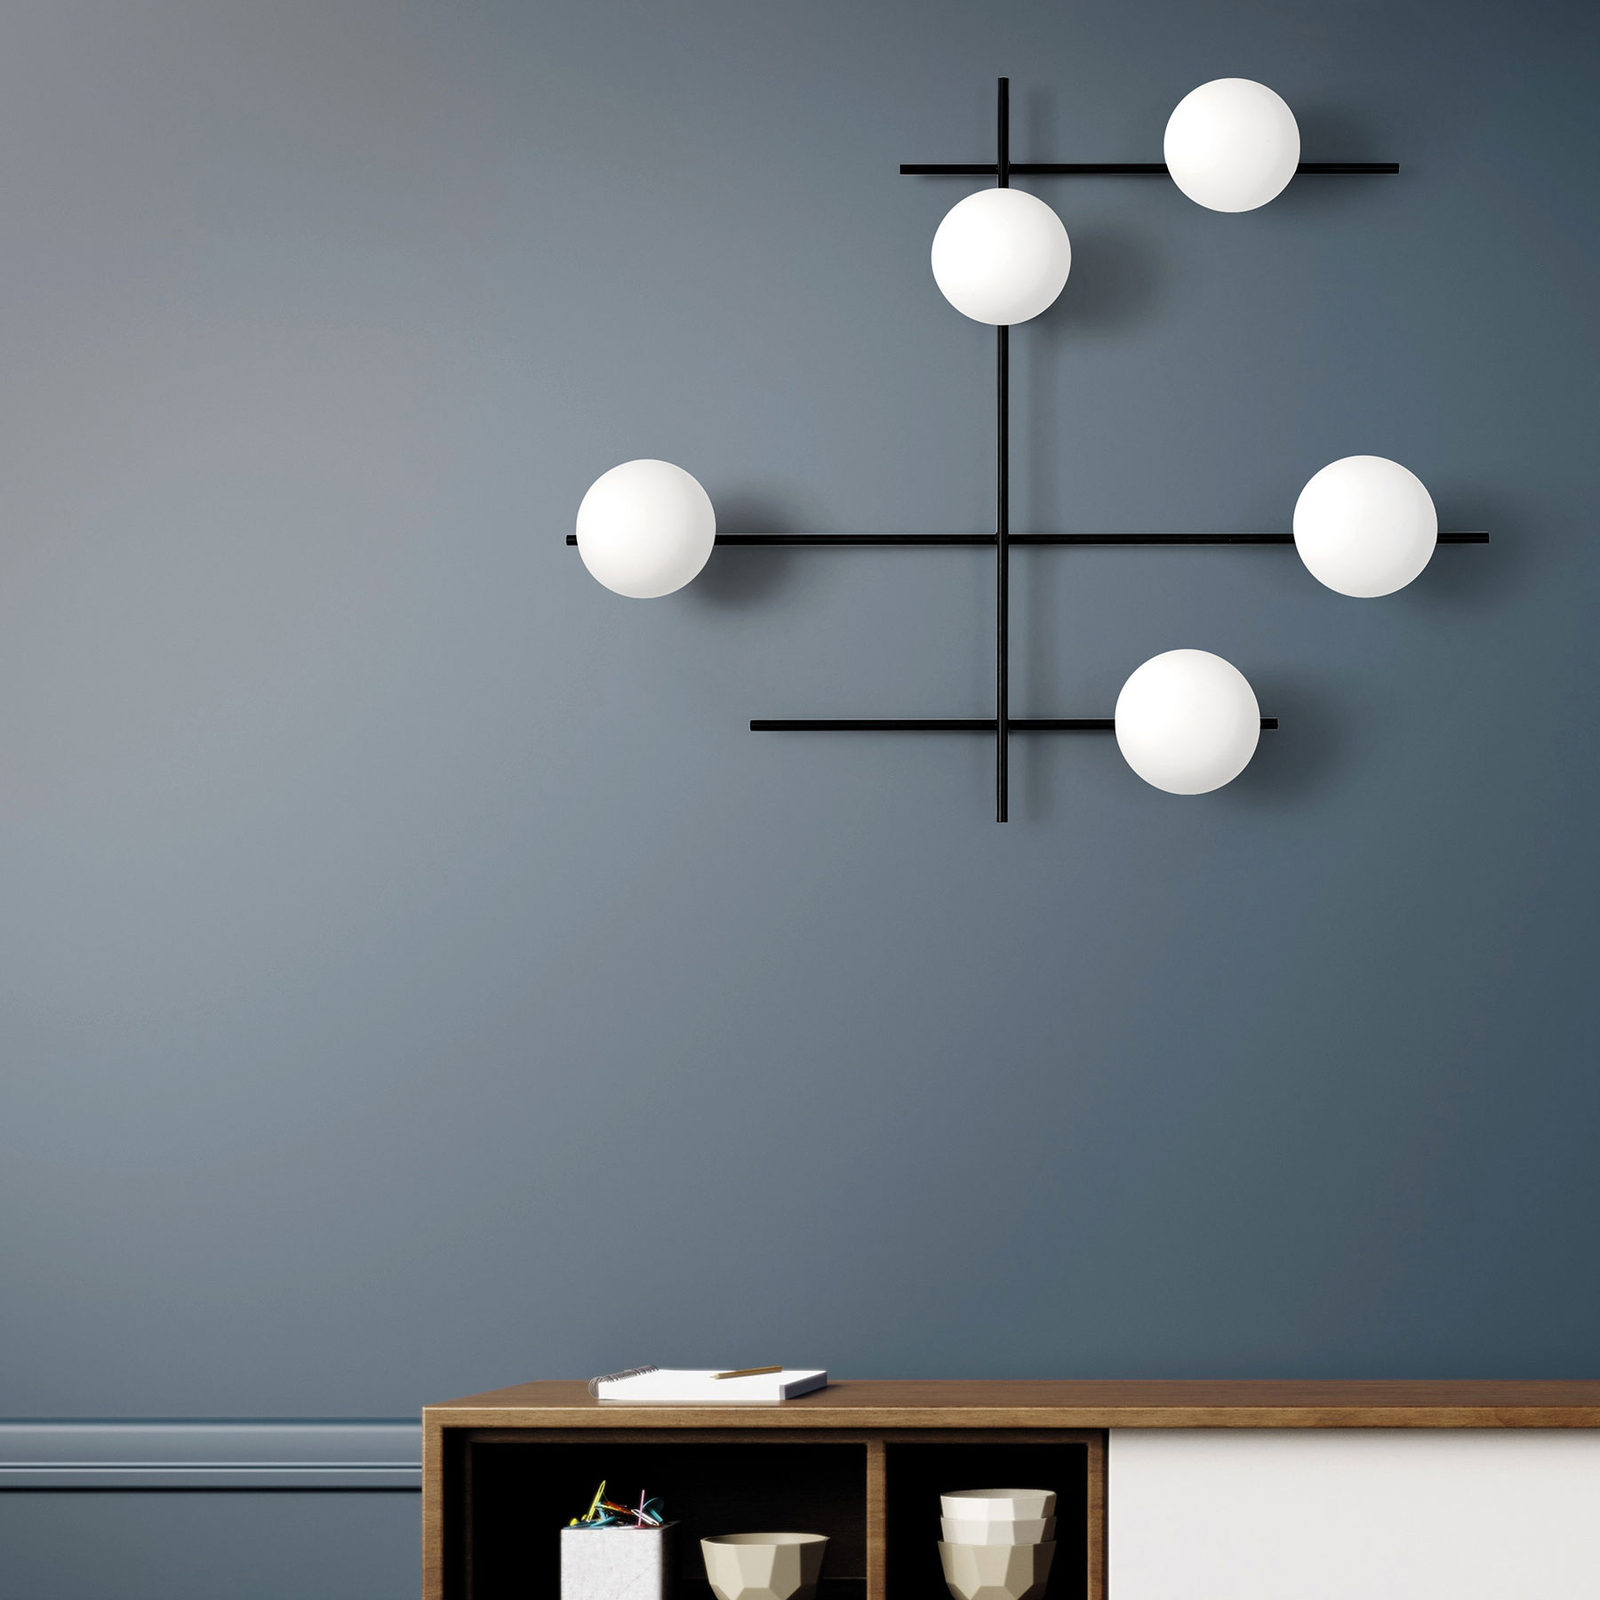 Mikado wall light, frosted glass, 5-bulb